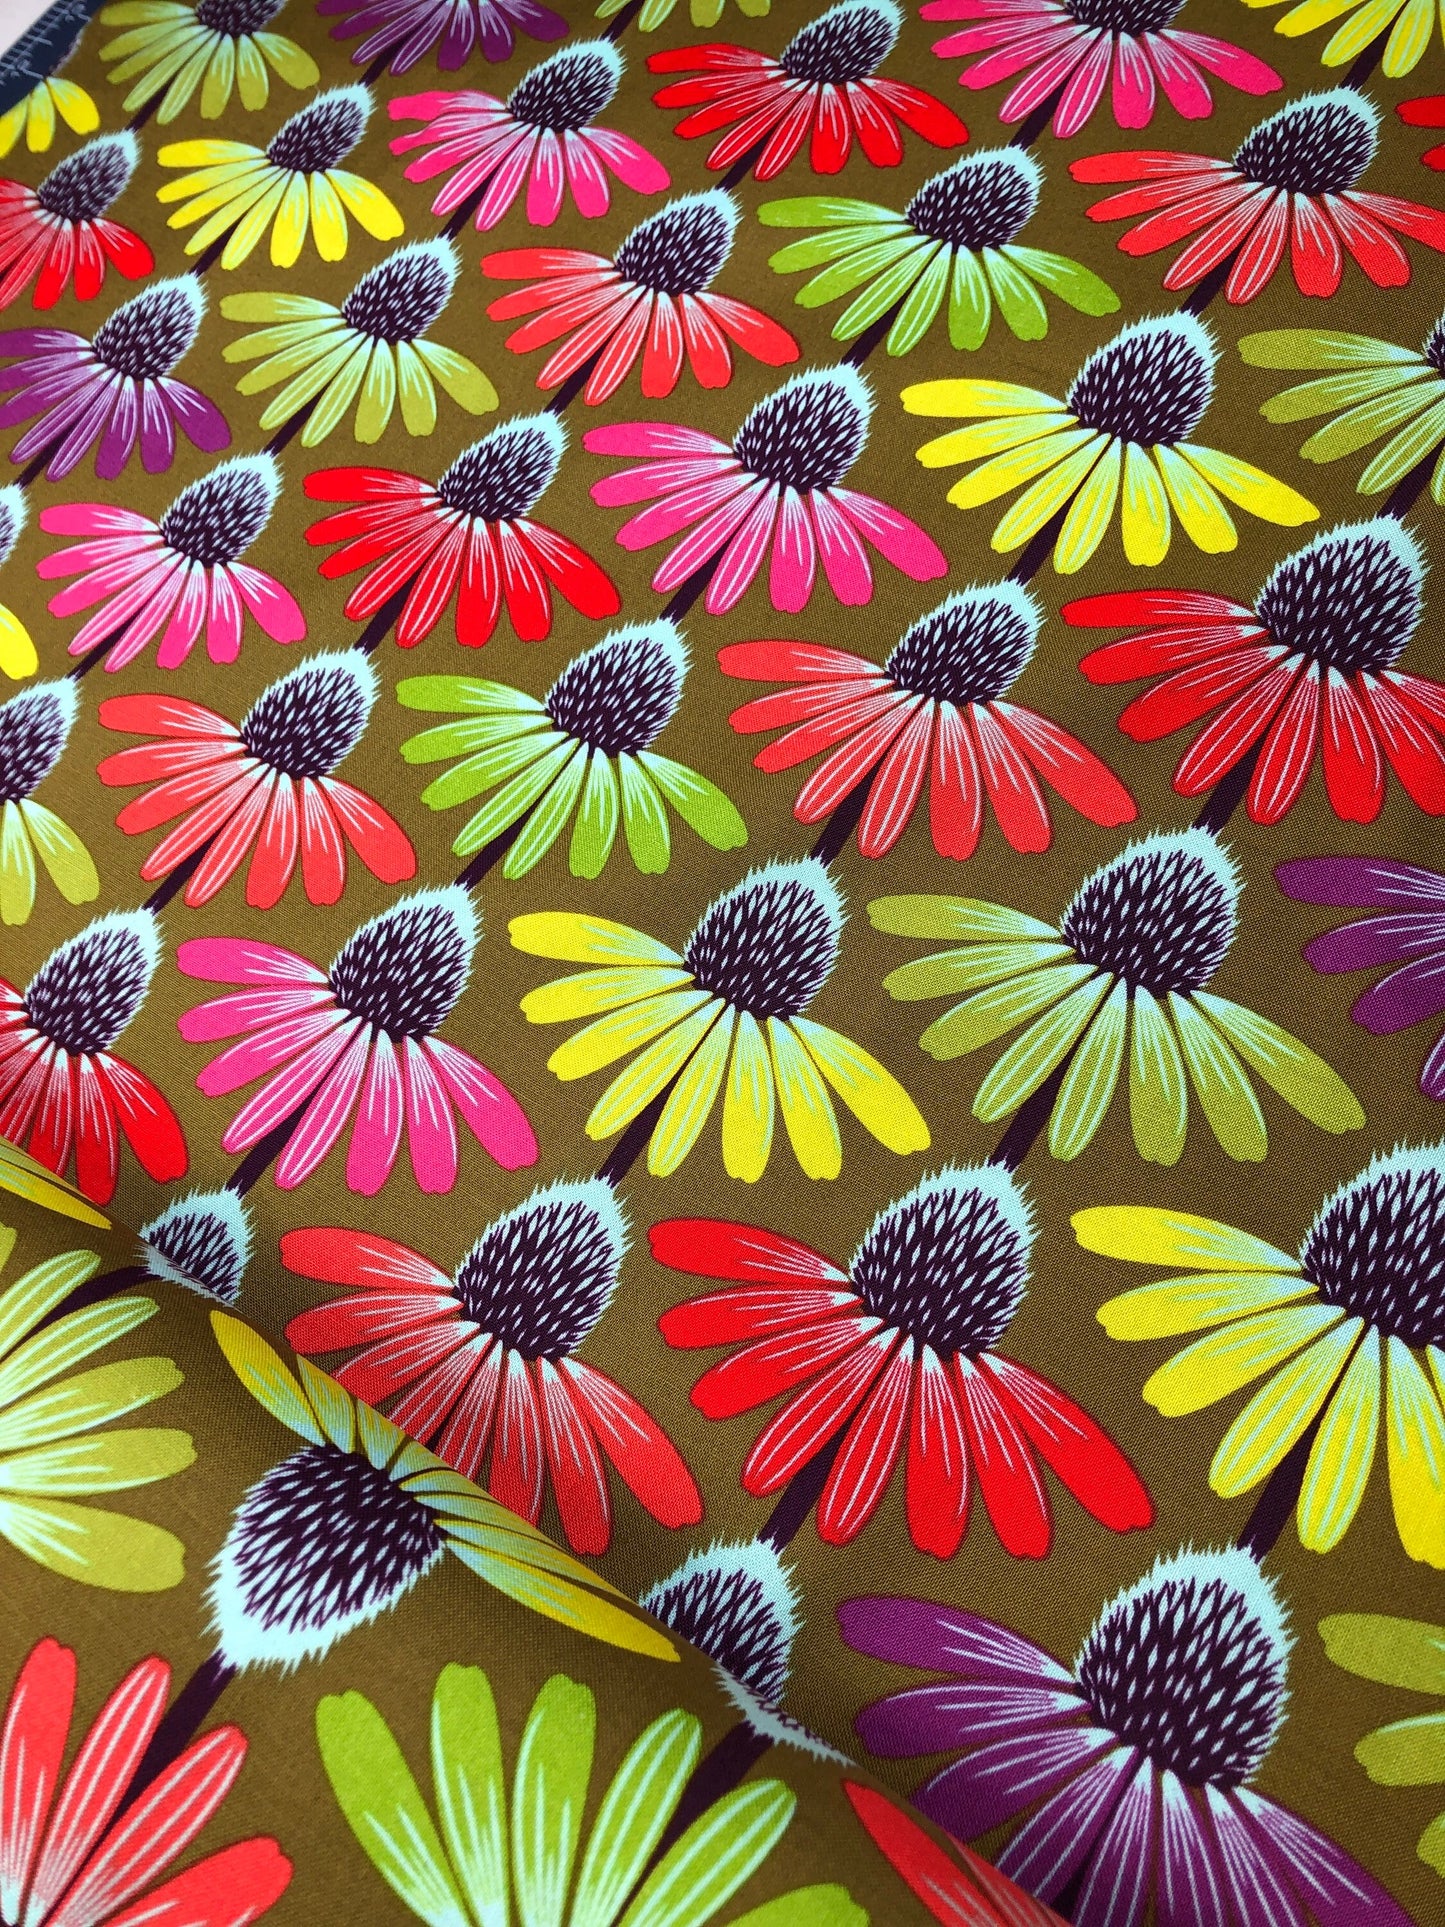 Echinacea Glow Autumn PWAH149, HINDSIGHT, Anna Maria Horner, Cone Flower, Quilt Fabric, Cotton Fabric, Floral Fabric, Fabric By The Yard